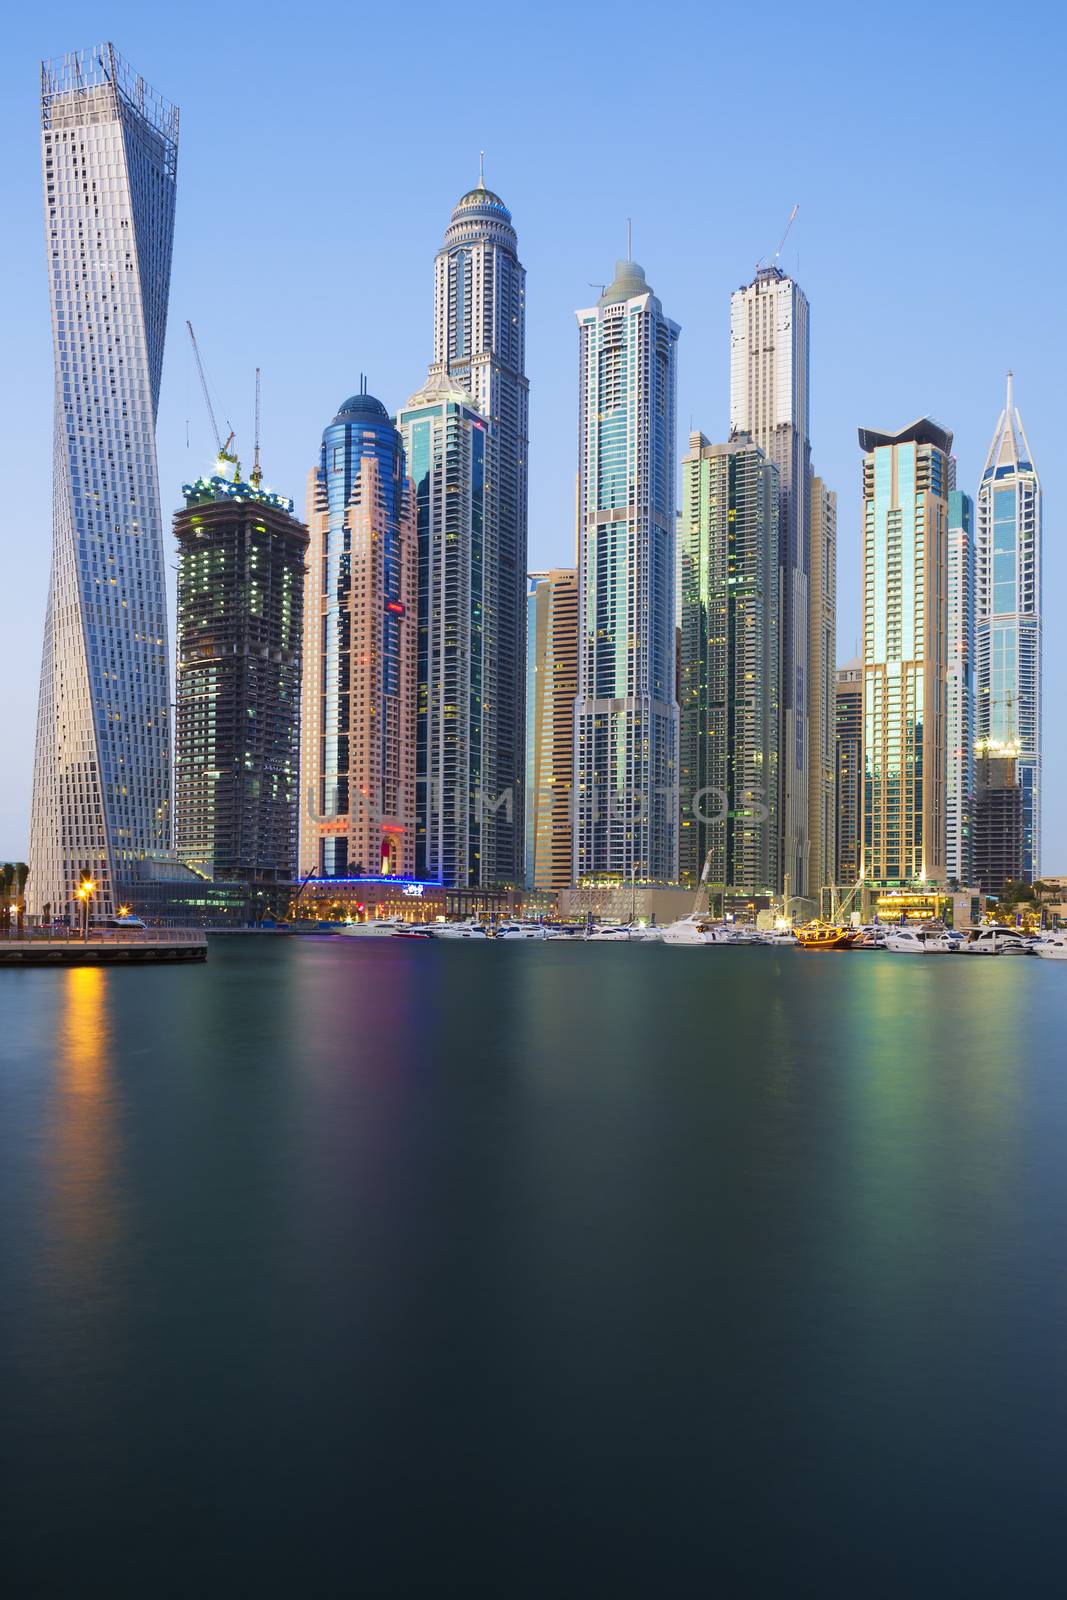 Vertical view of kyscrapers in Dubai by vwalakte